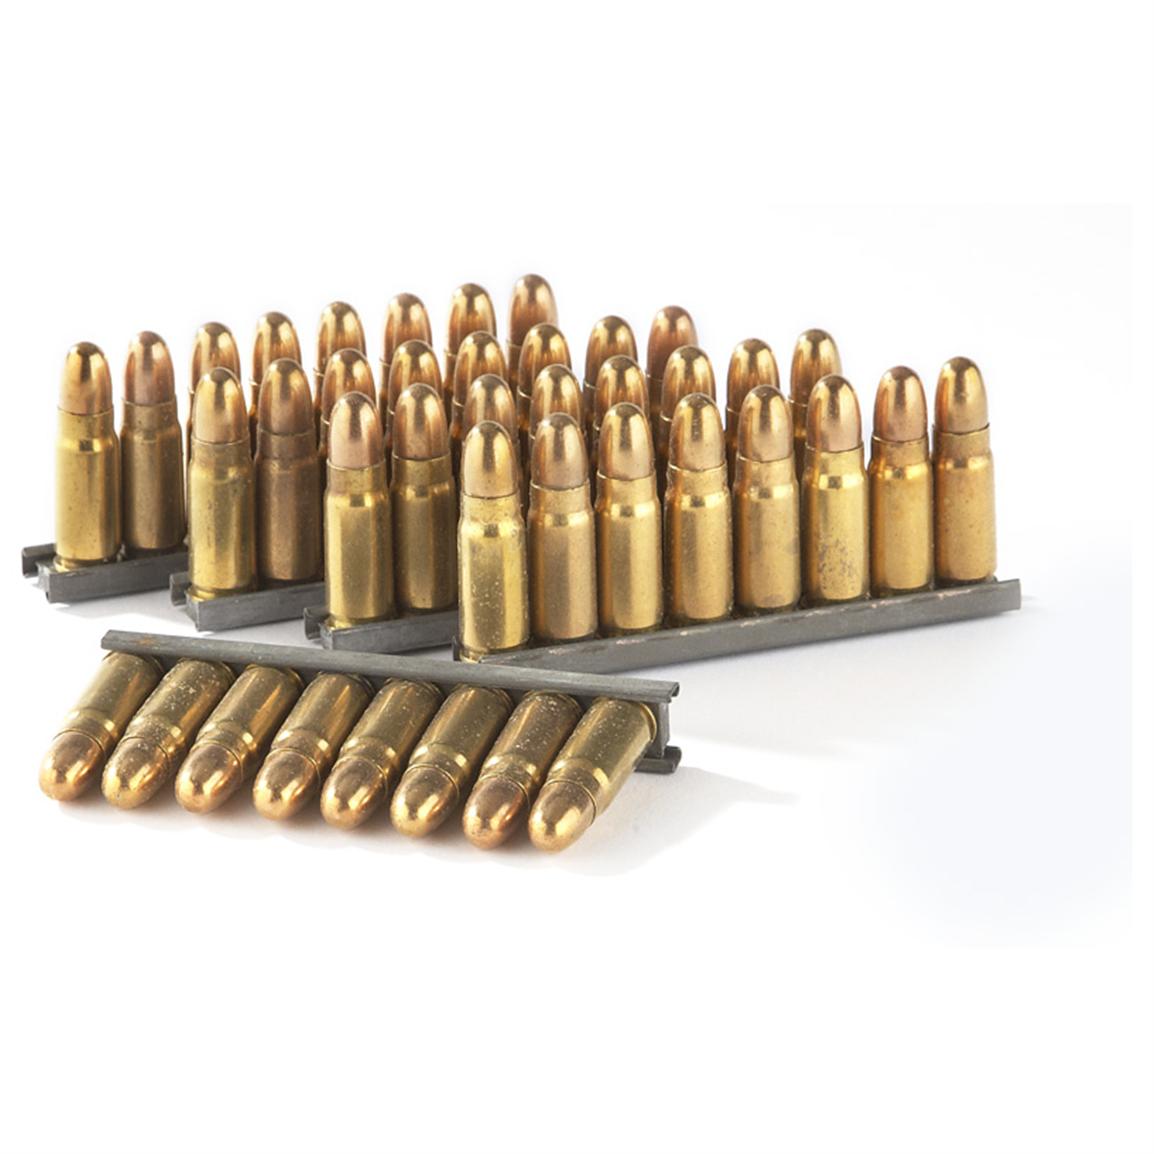 40 rds. Russian 7.62x25 TOK 86 Grain FMJ Ammo with Stripper Clips ...